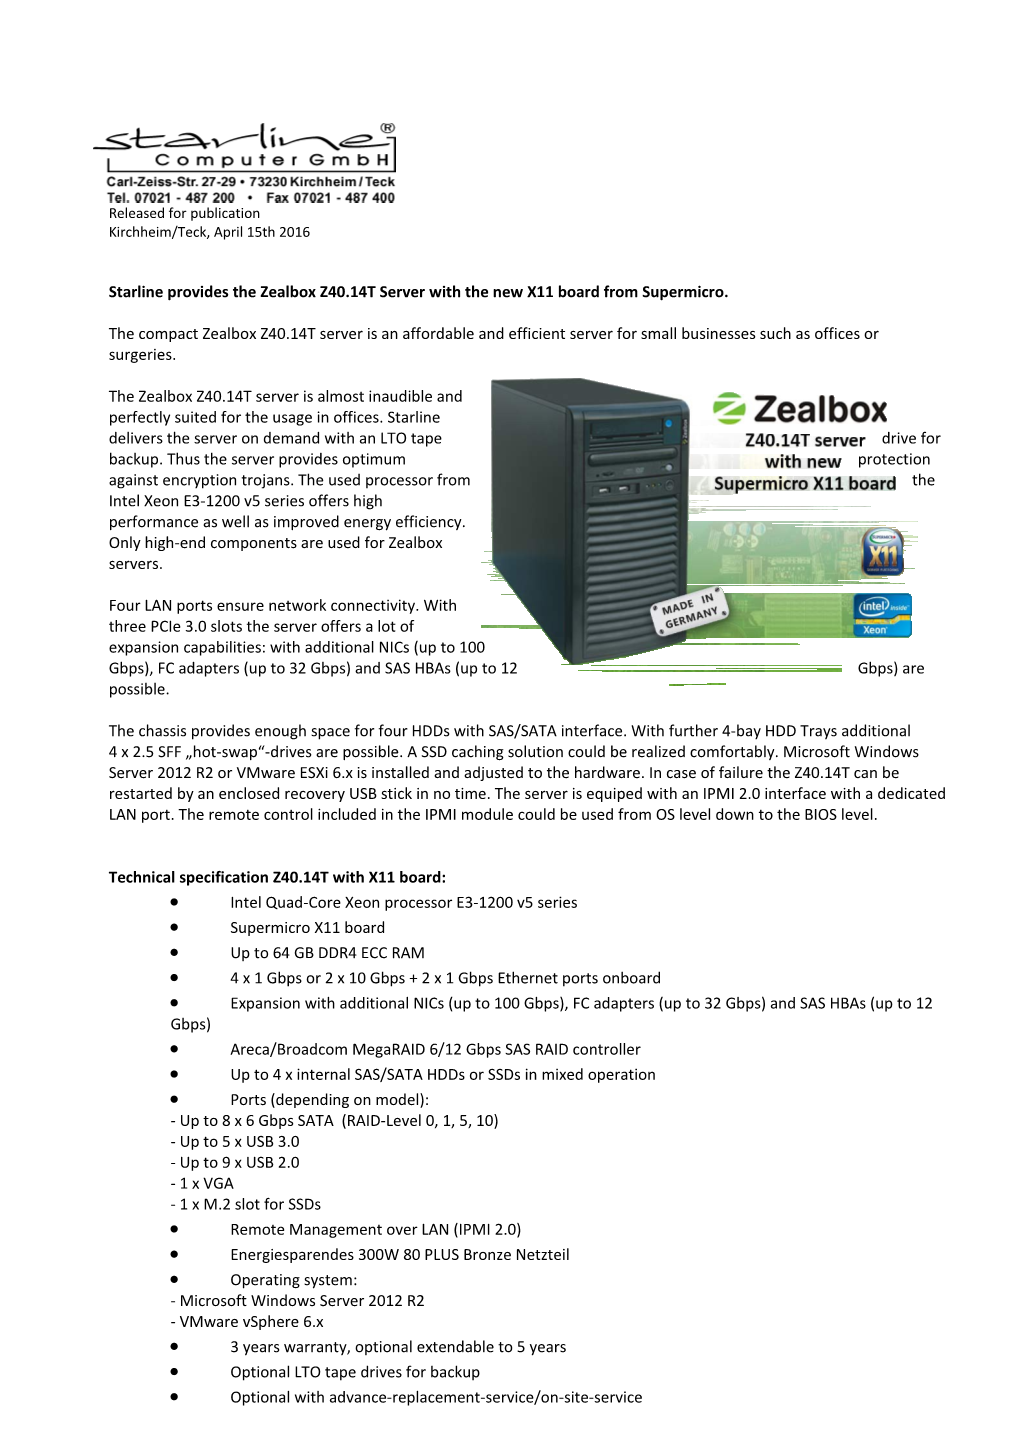 Starline Provides the Zealbox Z40.14T Server with the New X11 Board from Supermicro